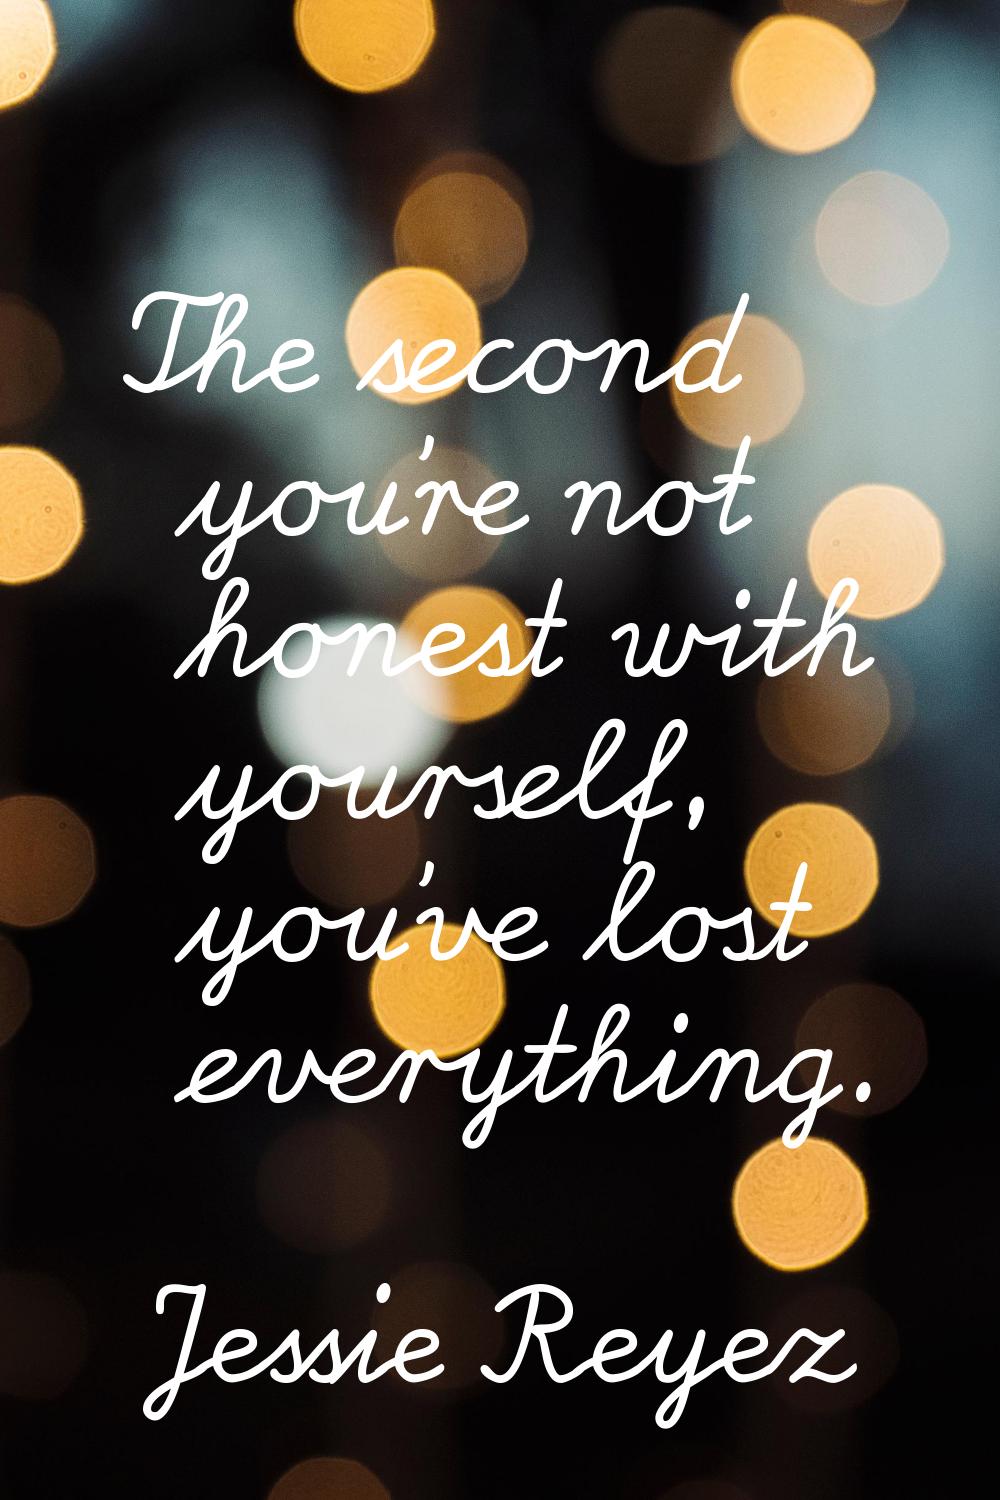 The second you're not honest with yourself, you've lost everything.